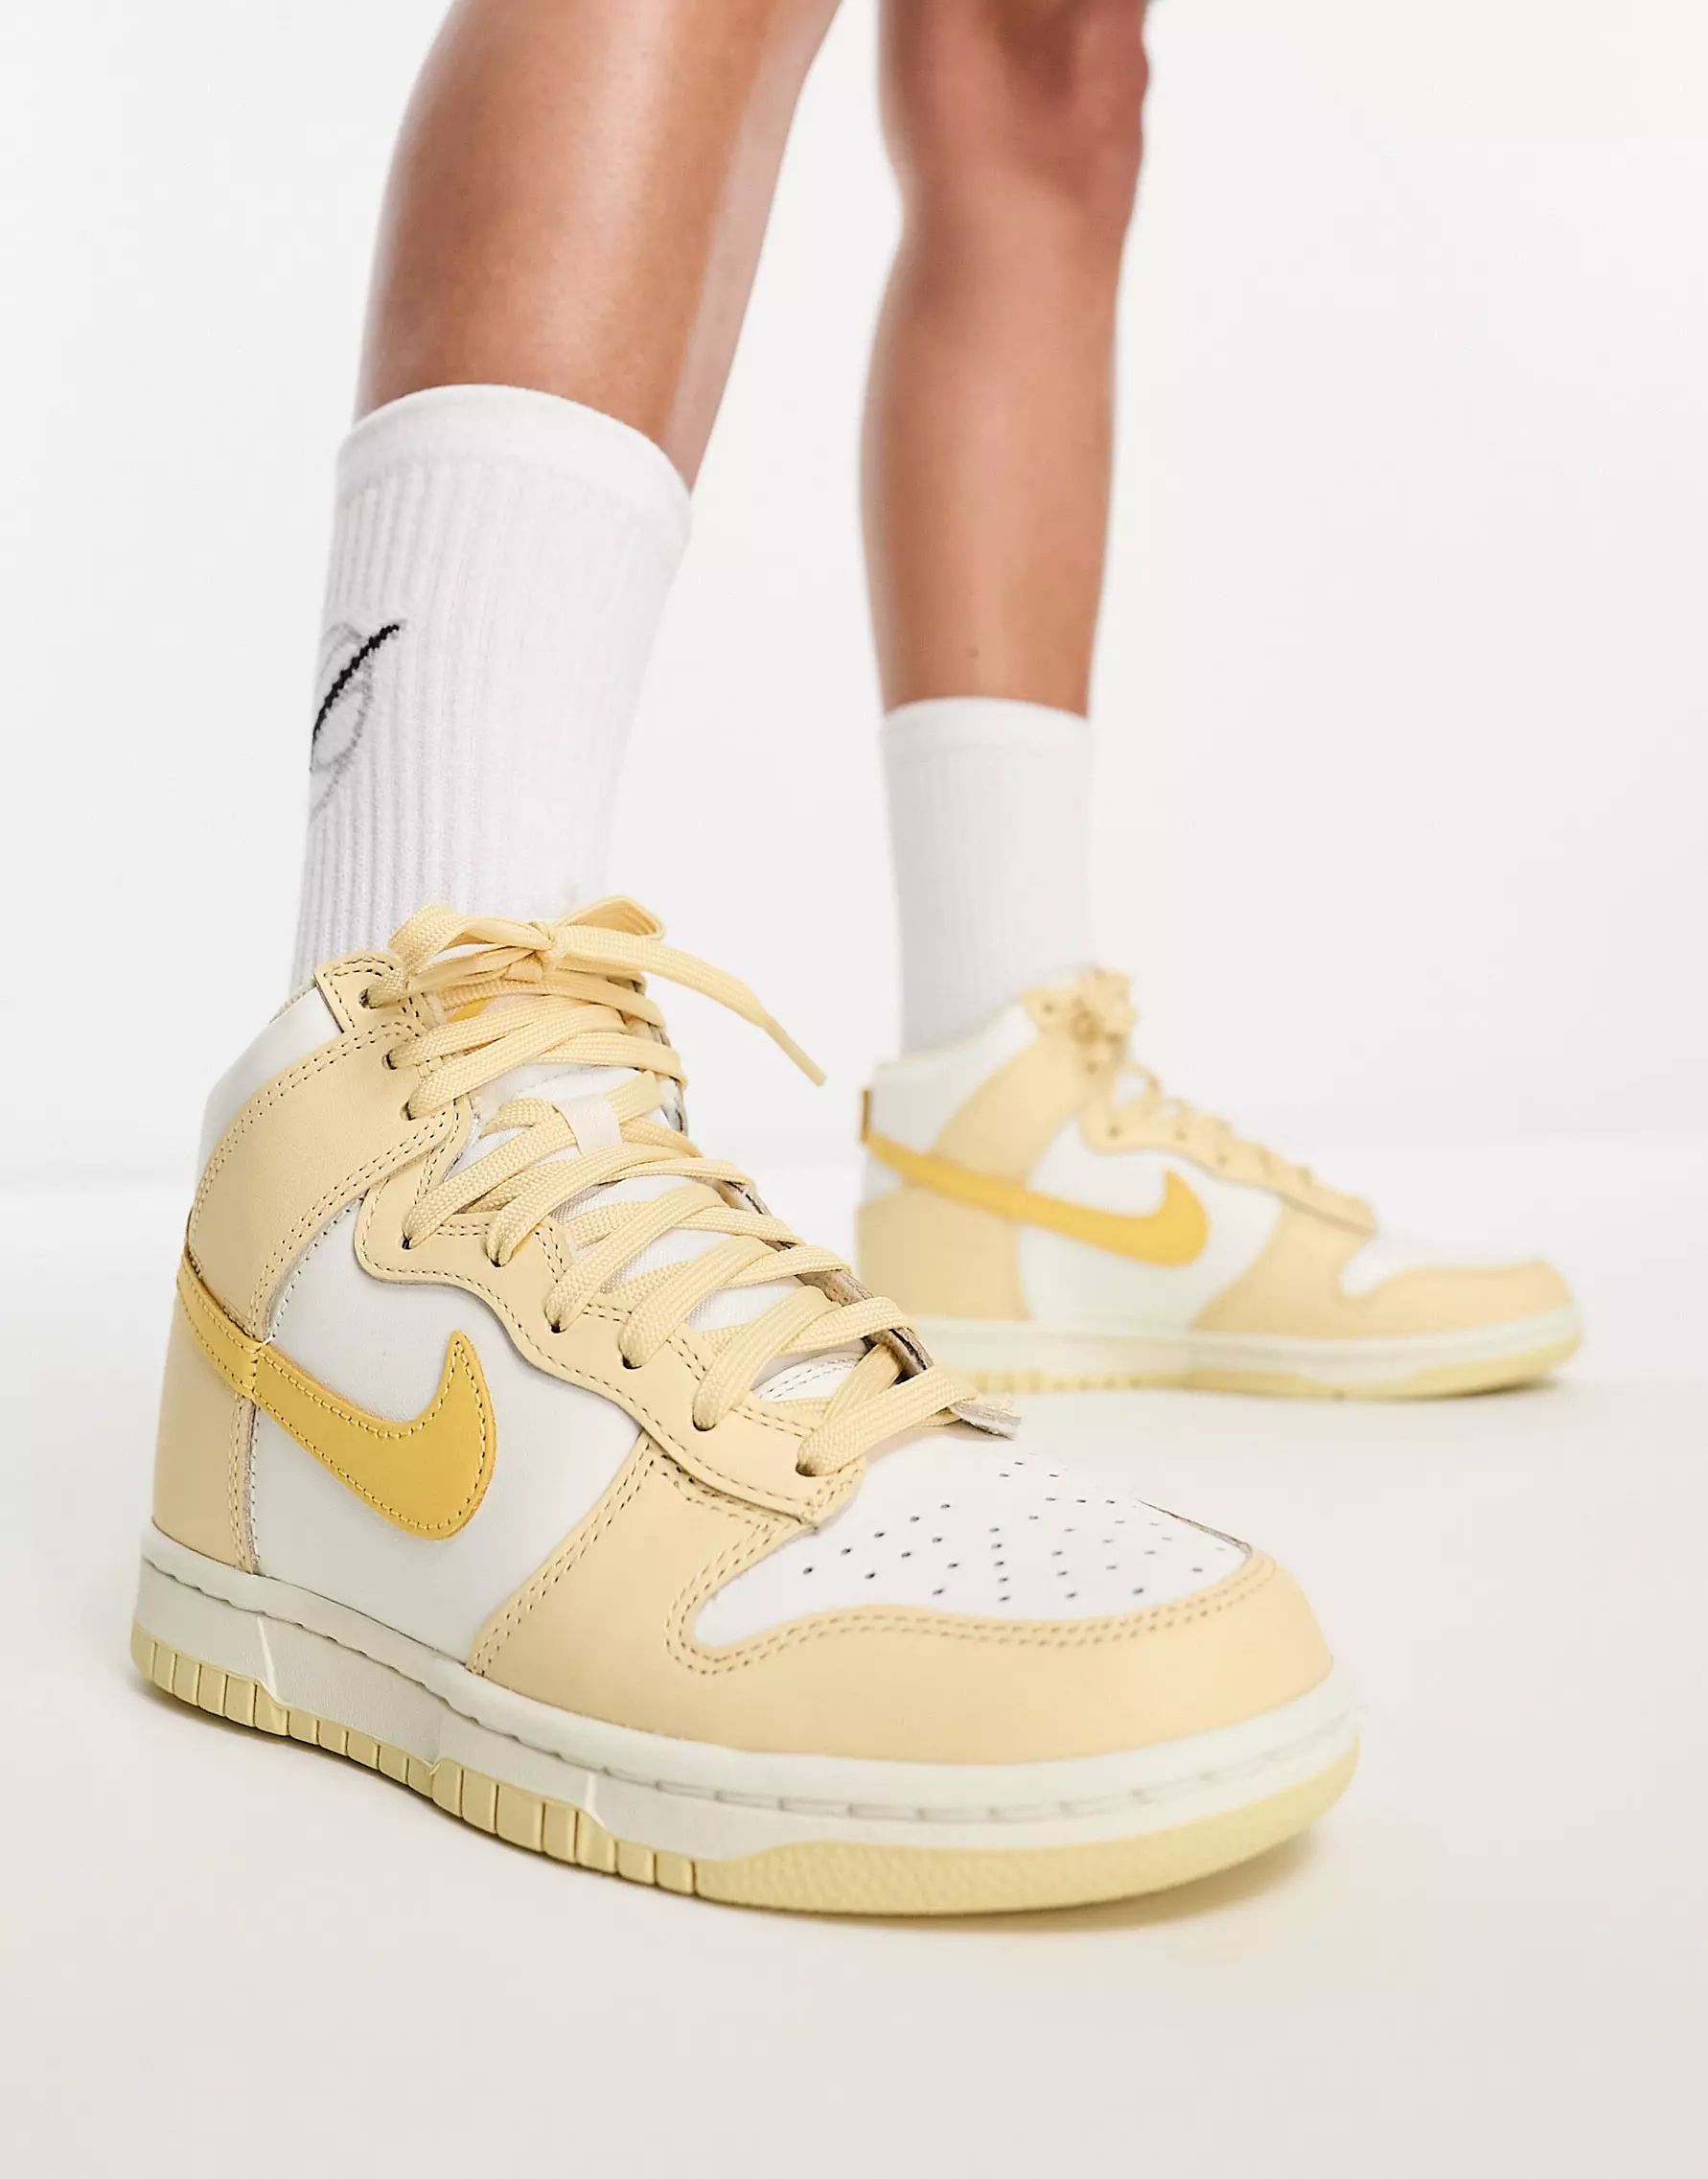 Nike Dunk High sneakers in white and gold | ASOS (Global)